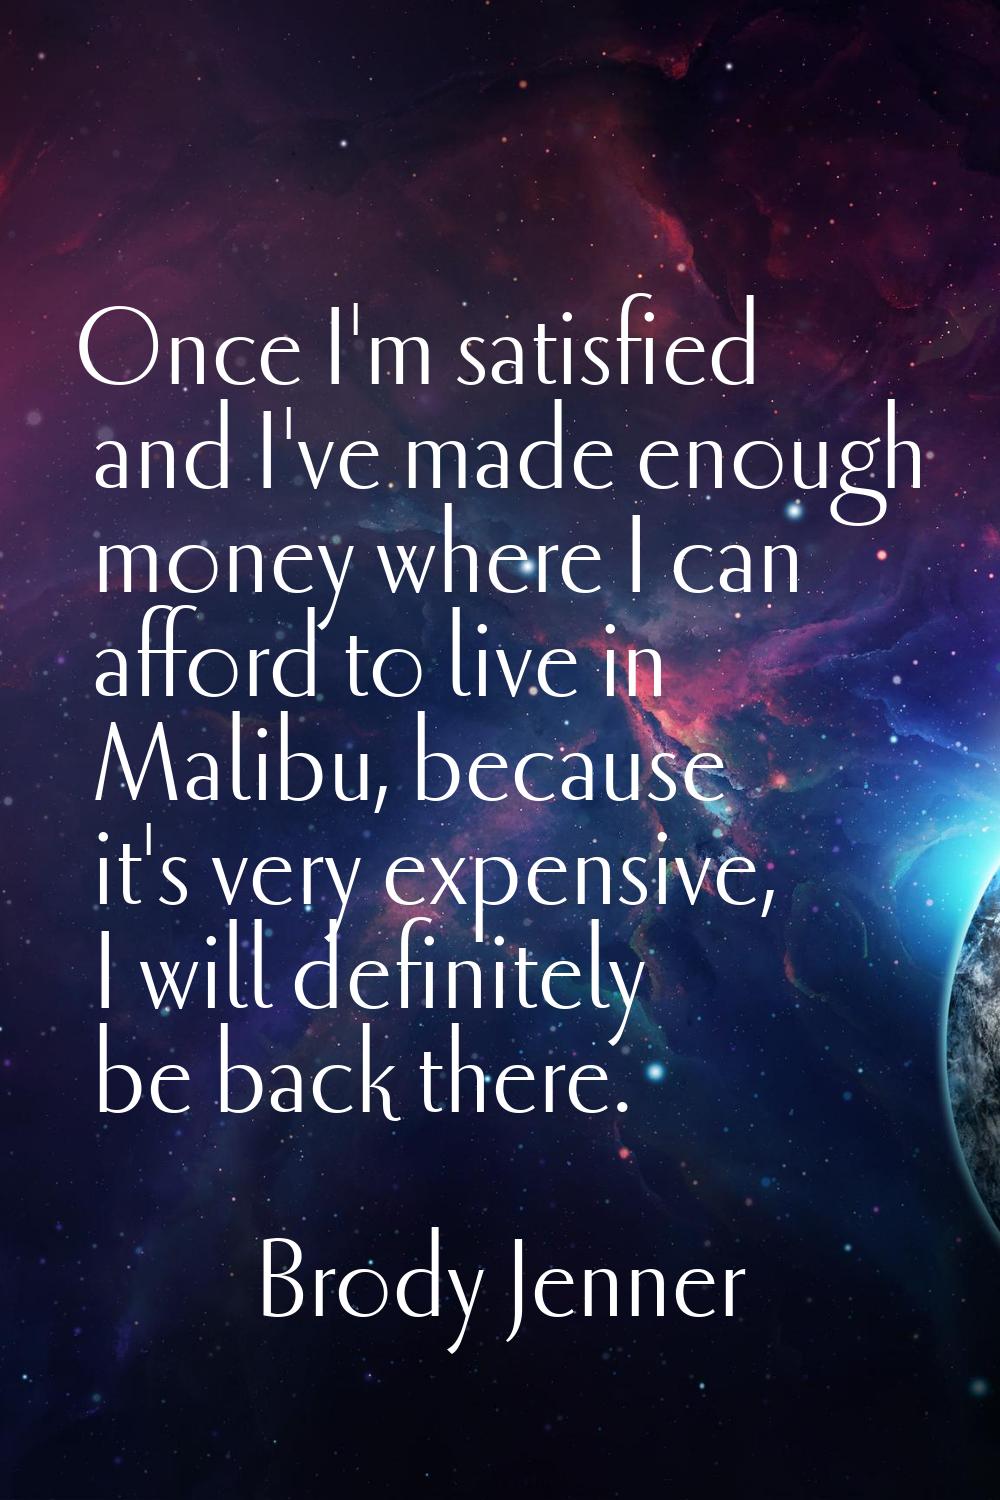 Once I'm satisfied and I've made enough money where I can afford to live in Malibu, because it's ve